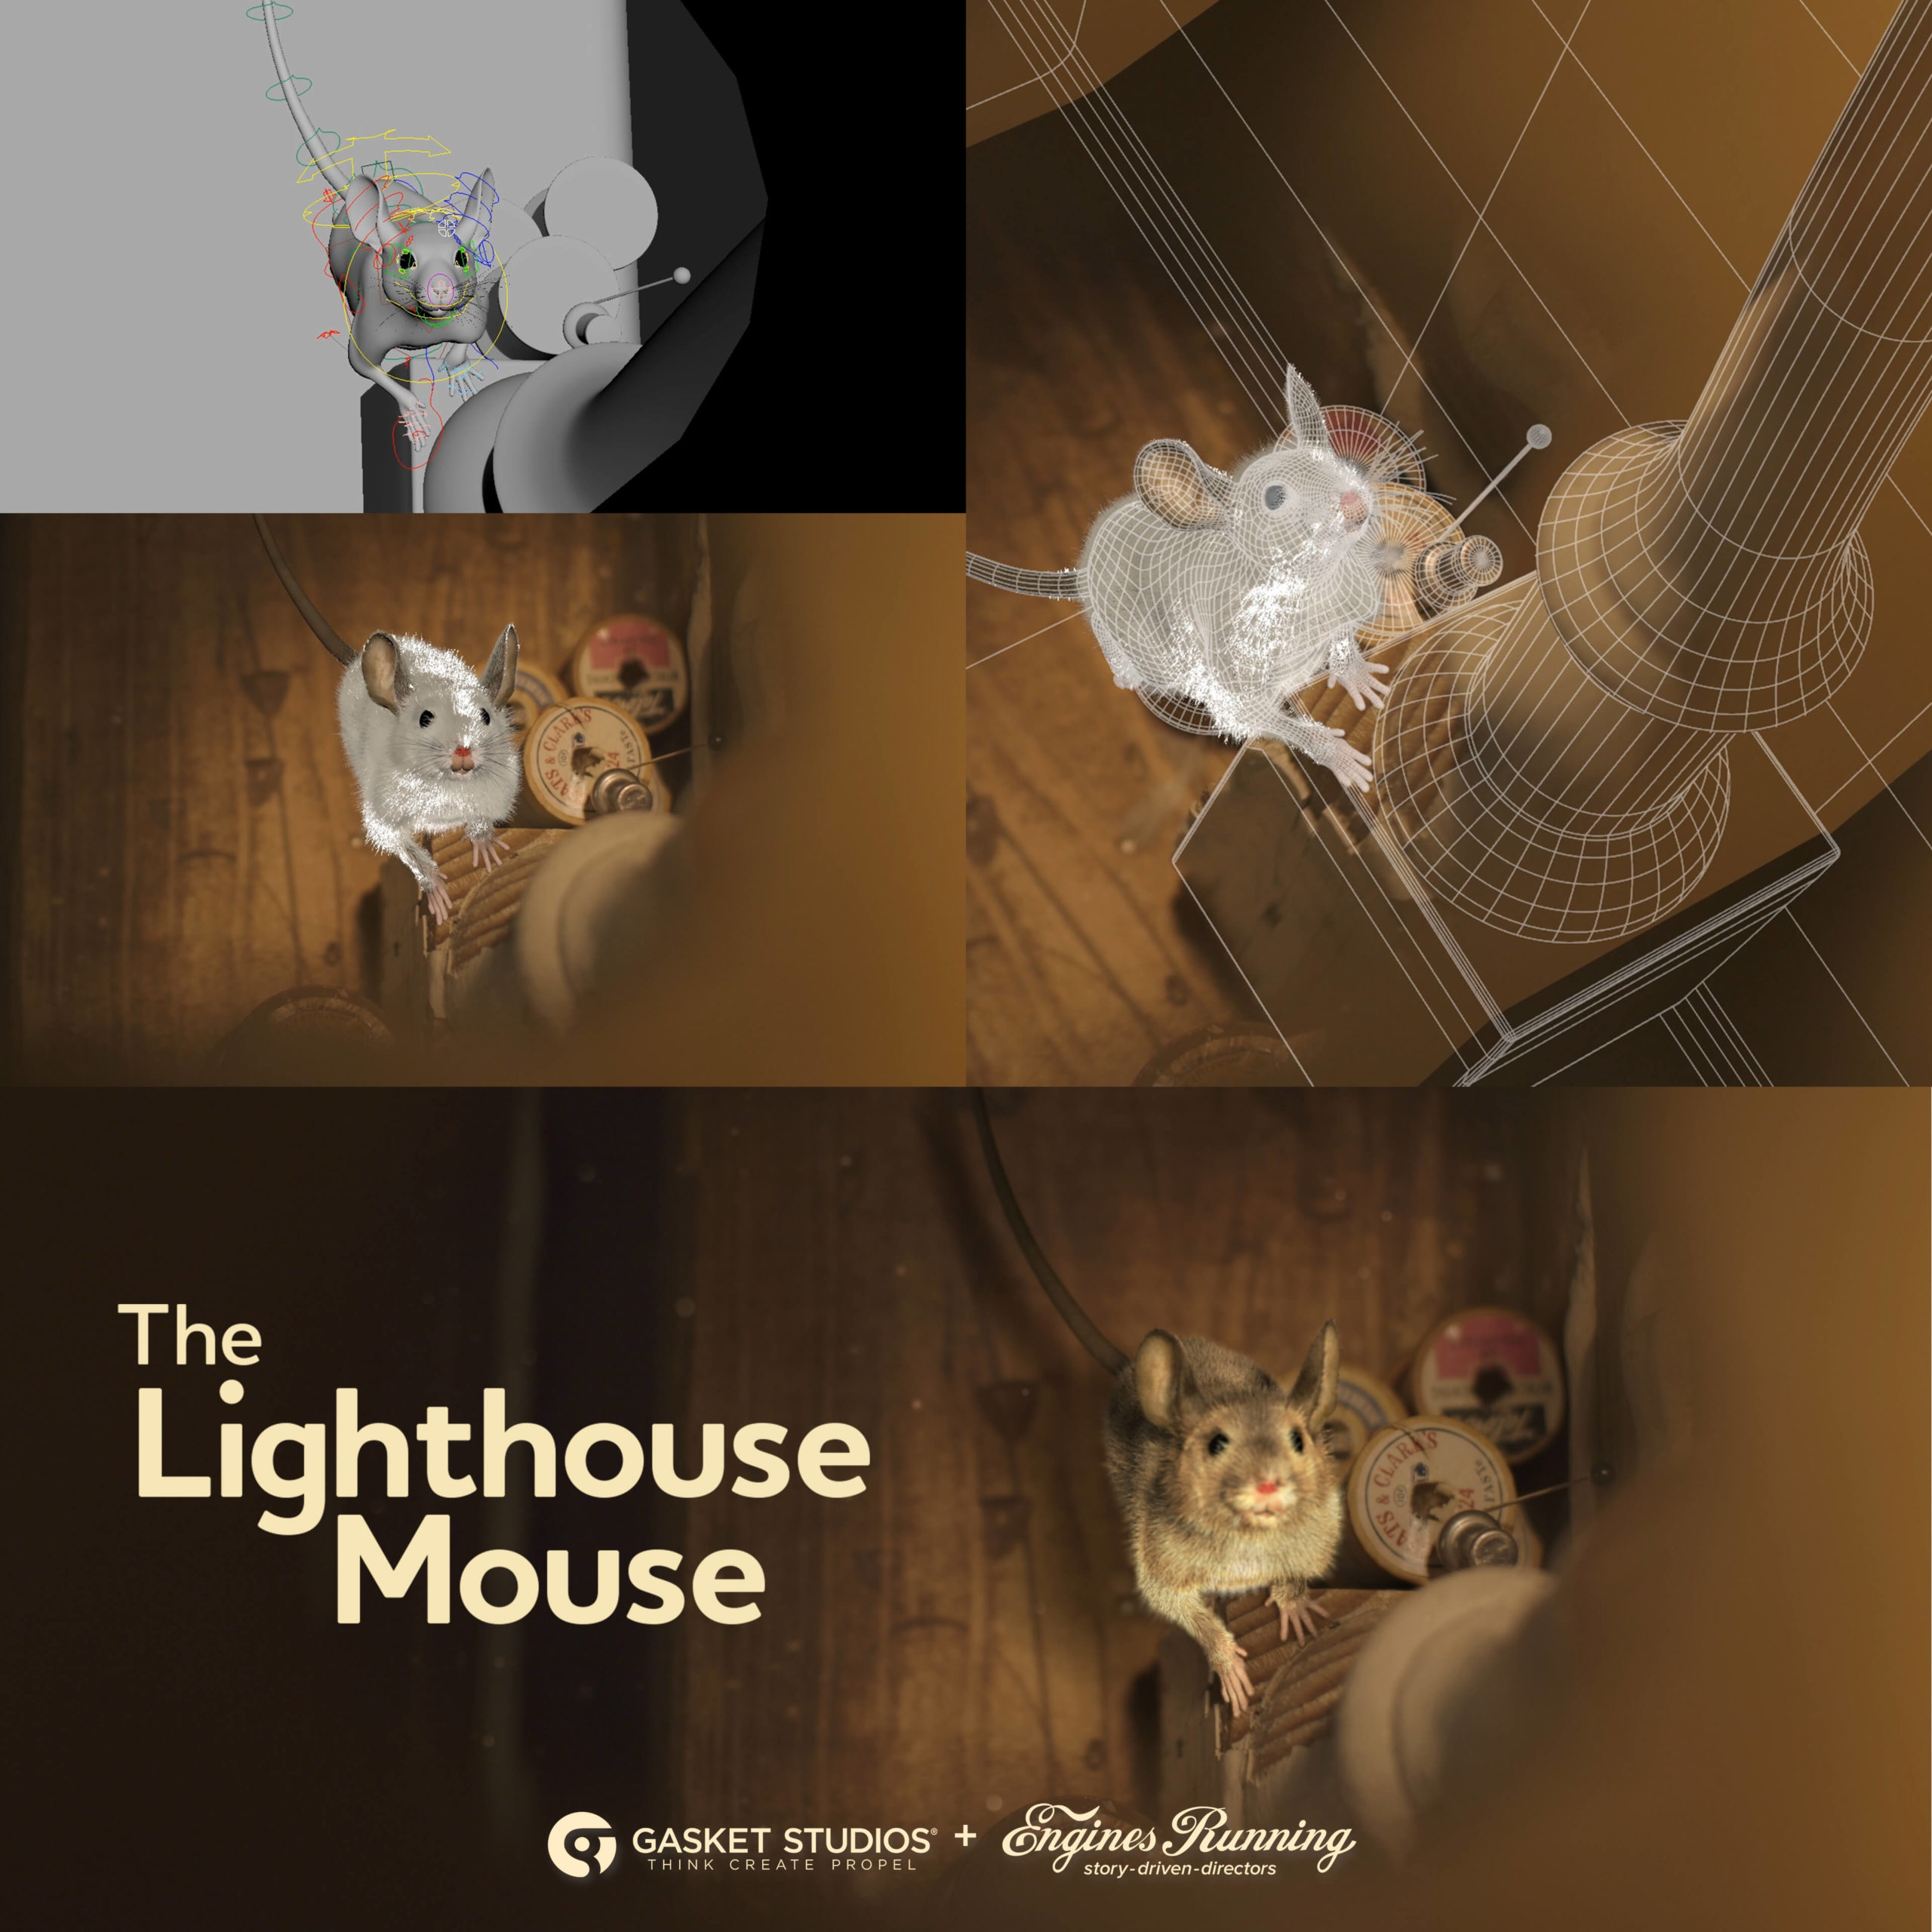 The Lighthouse Mouse